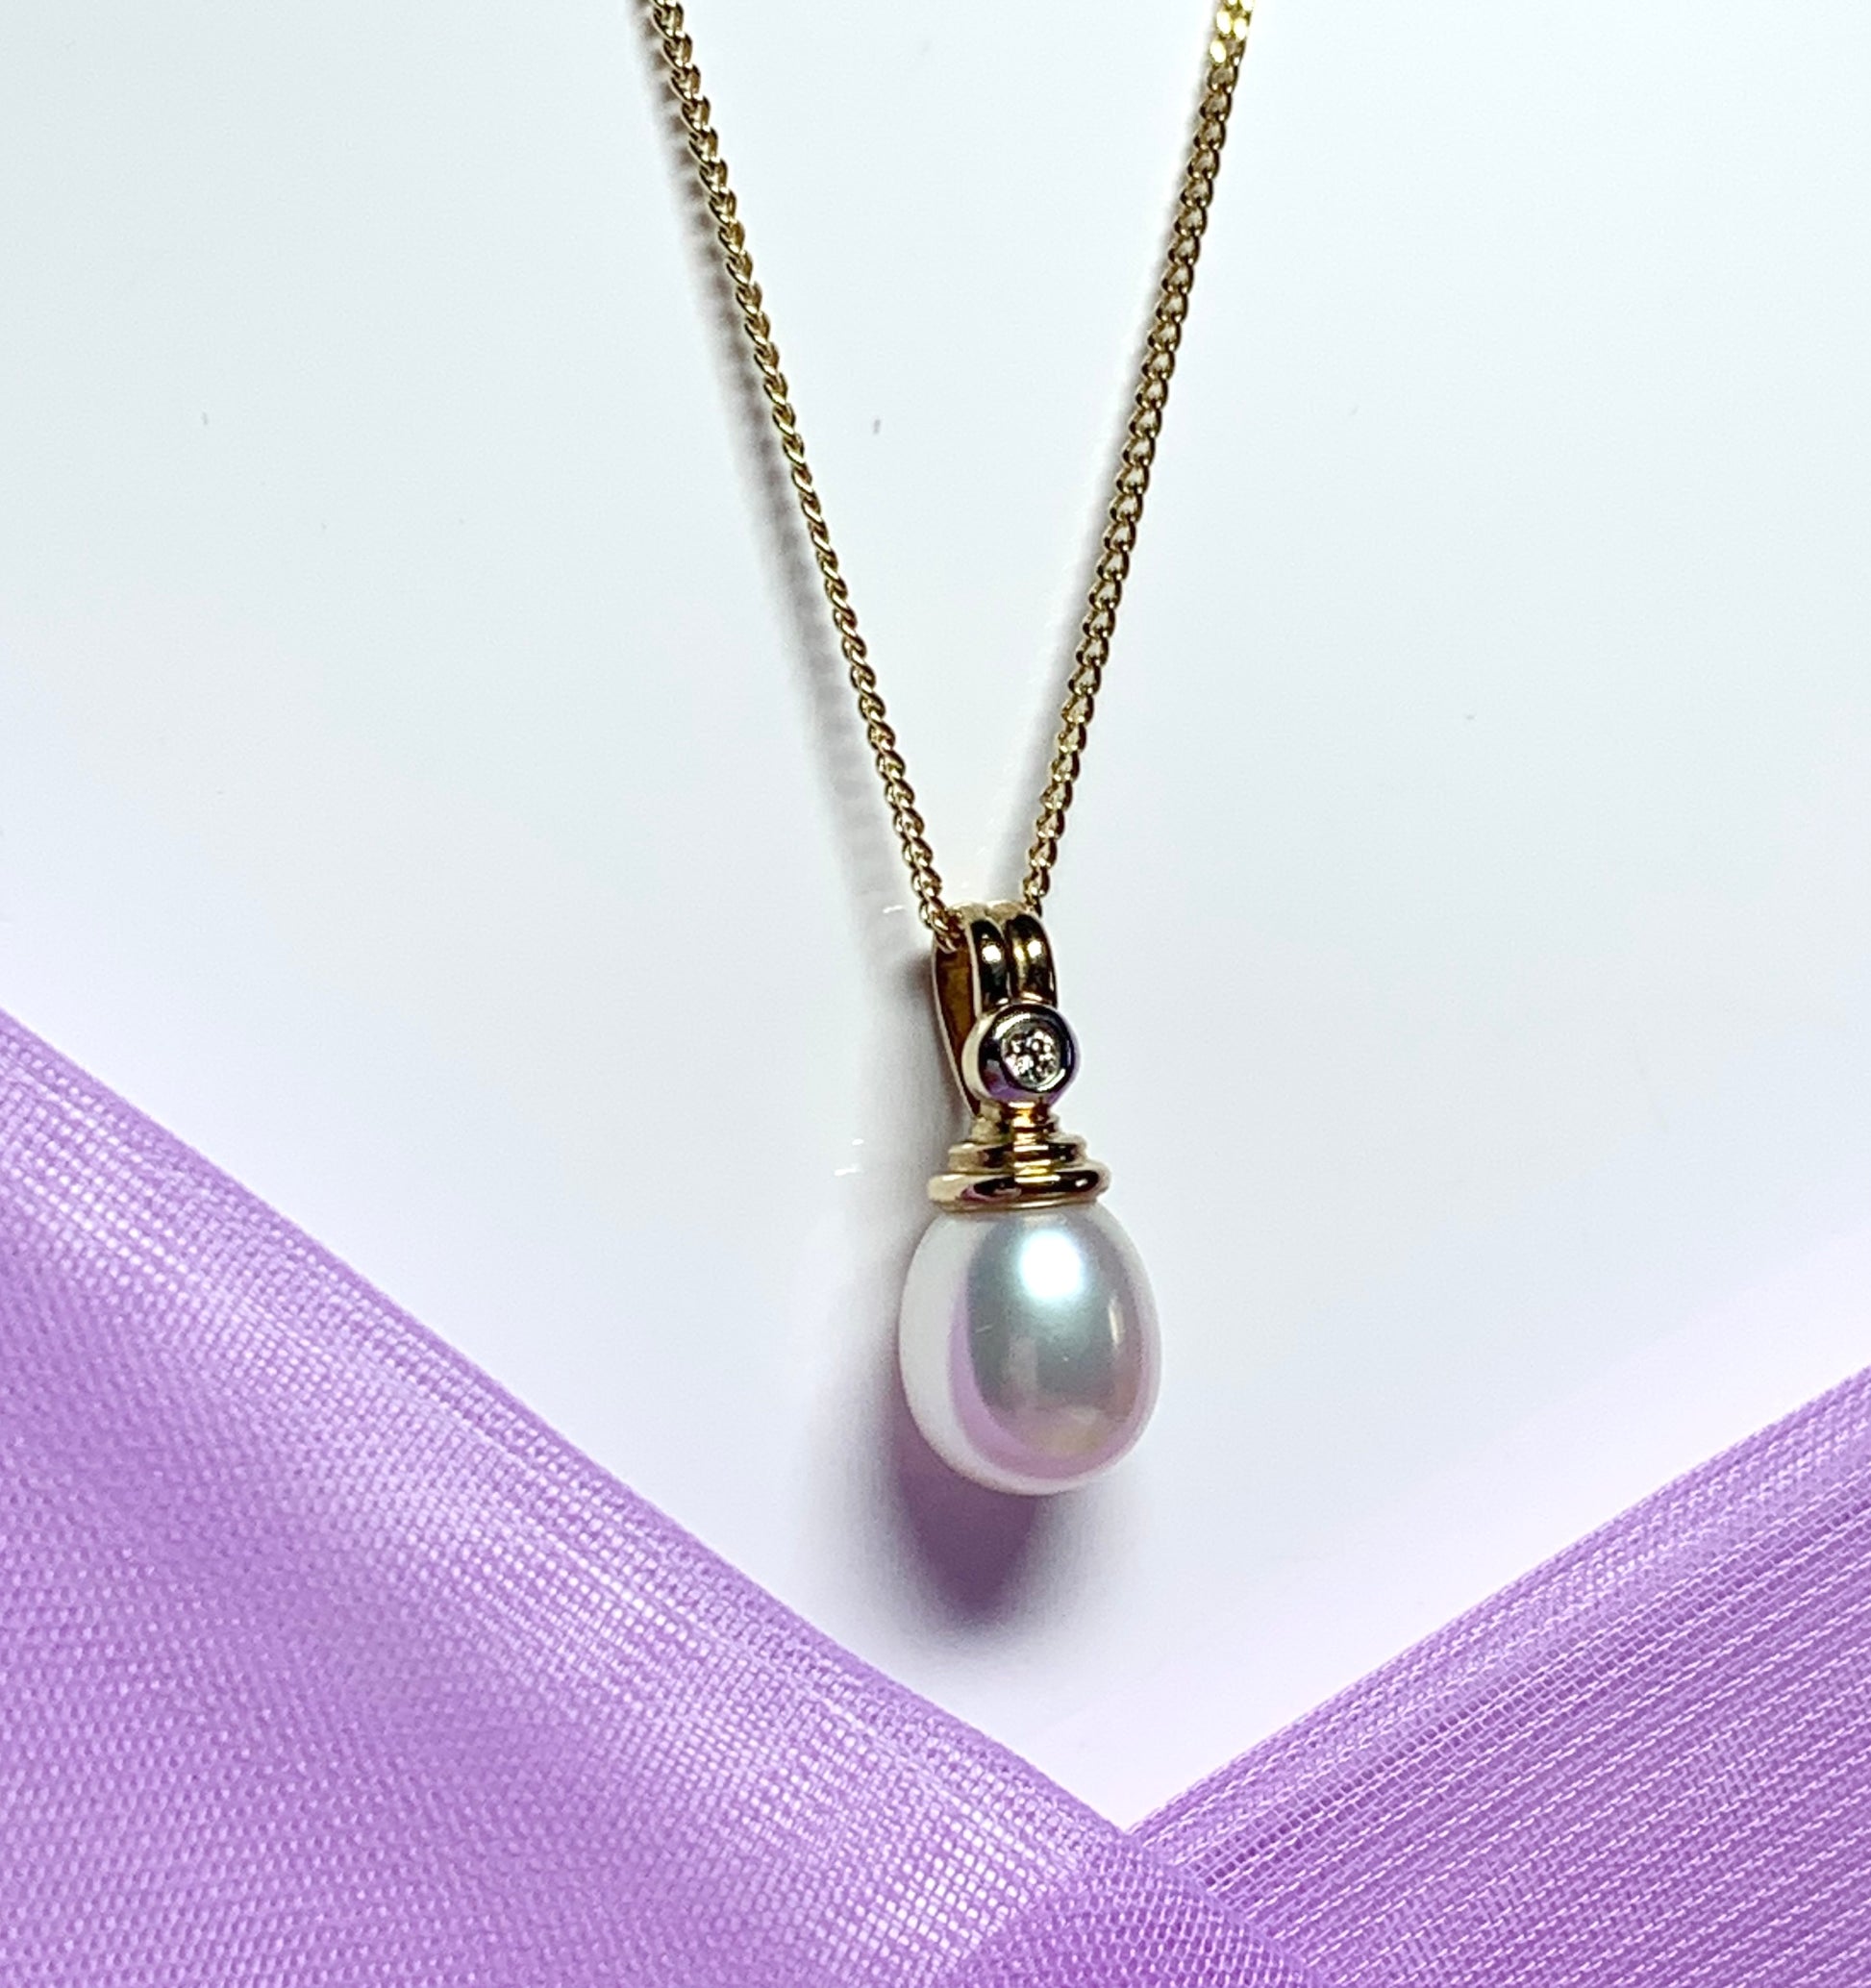 Pearl necklace freshwater cultured and diamond yellow gold pendant